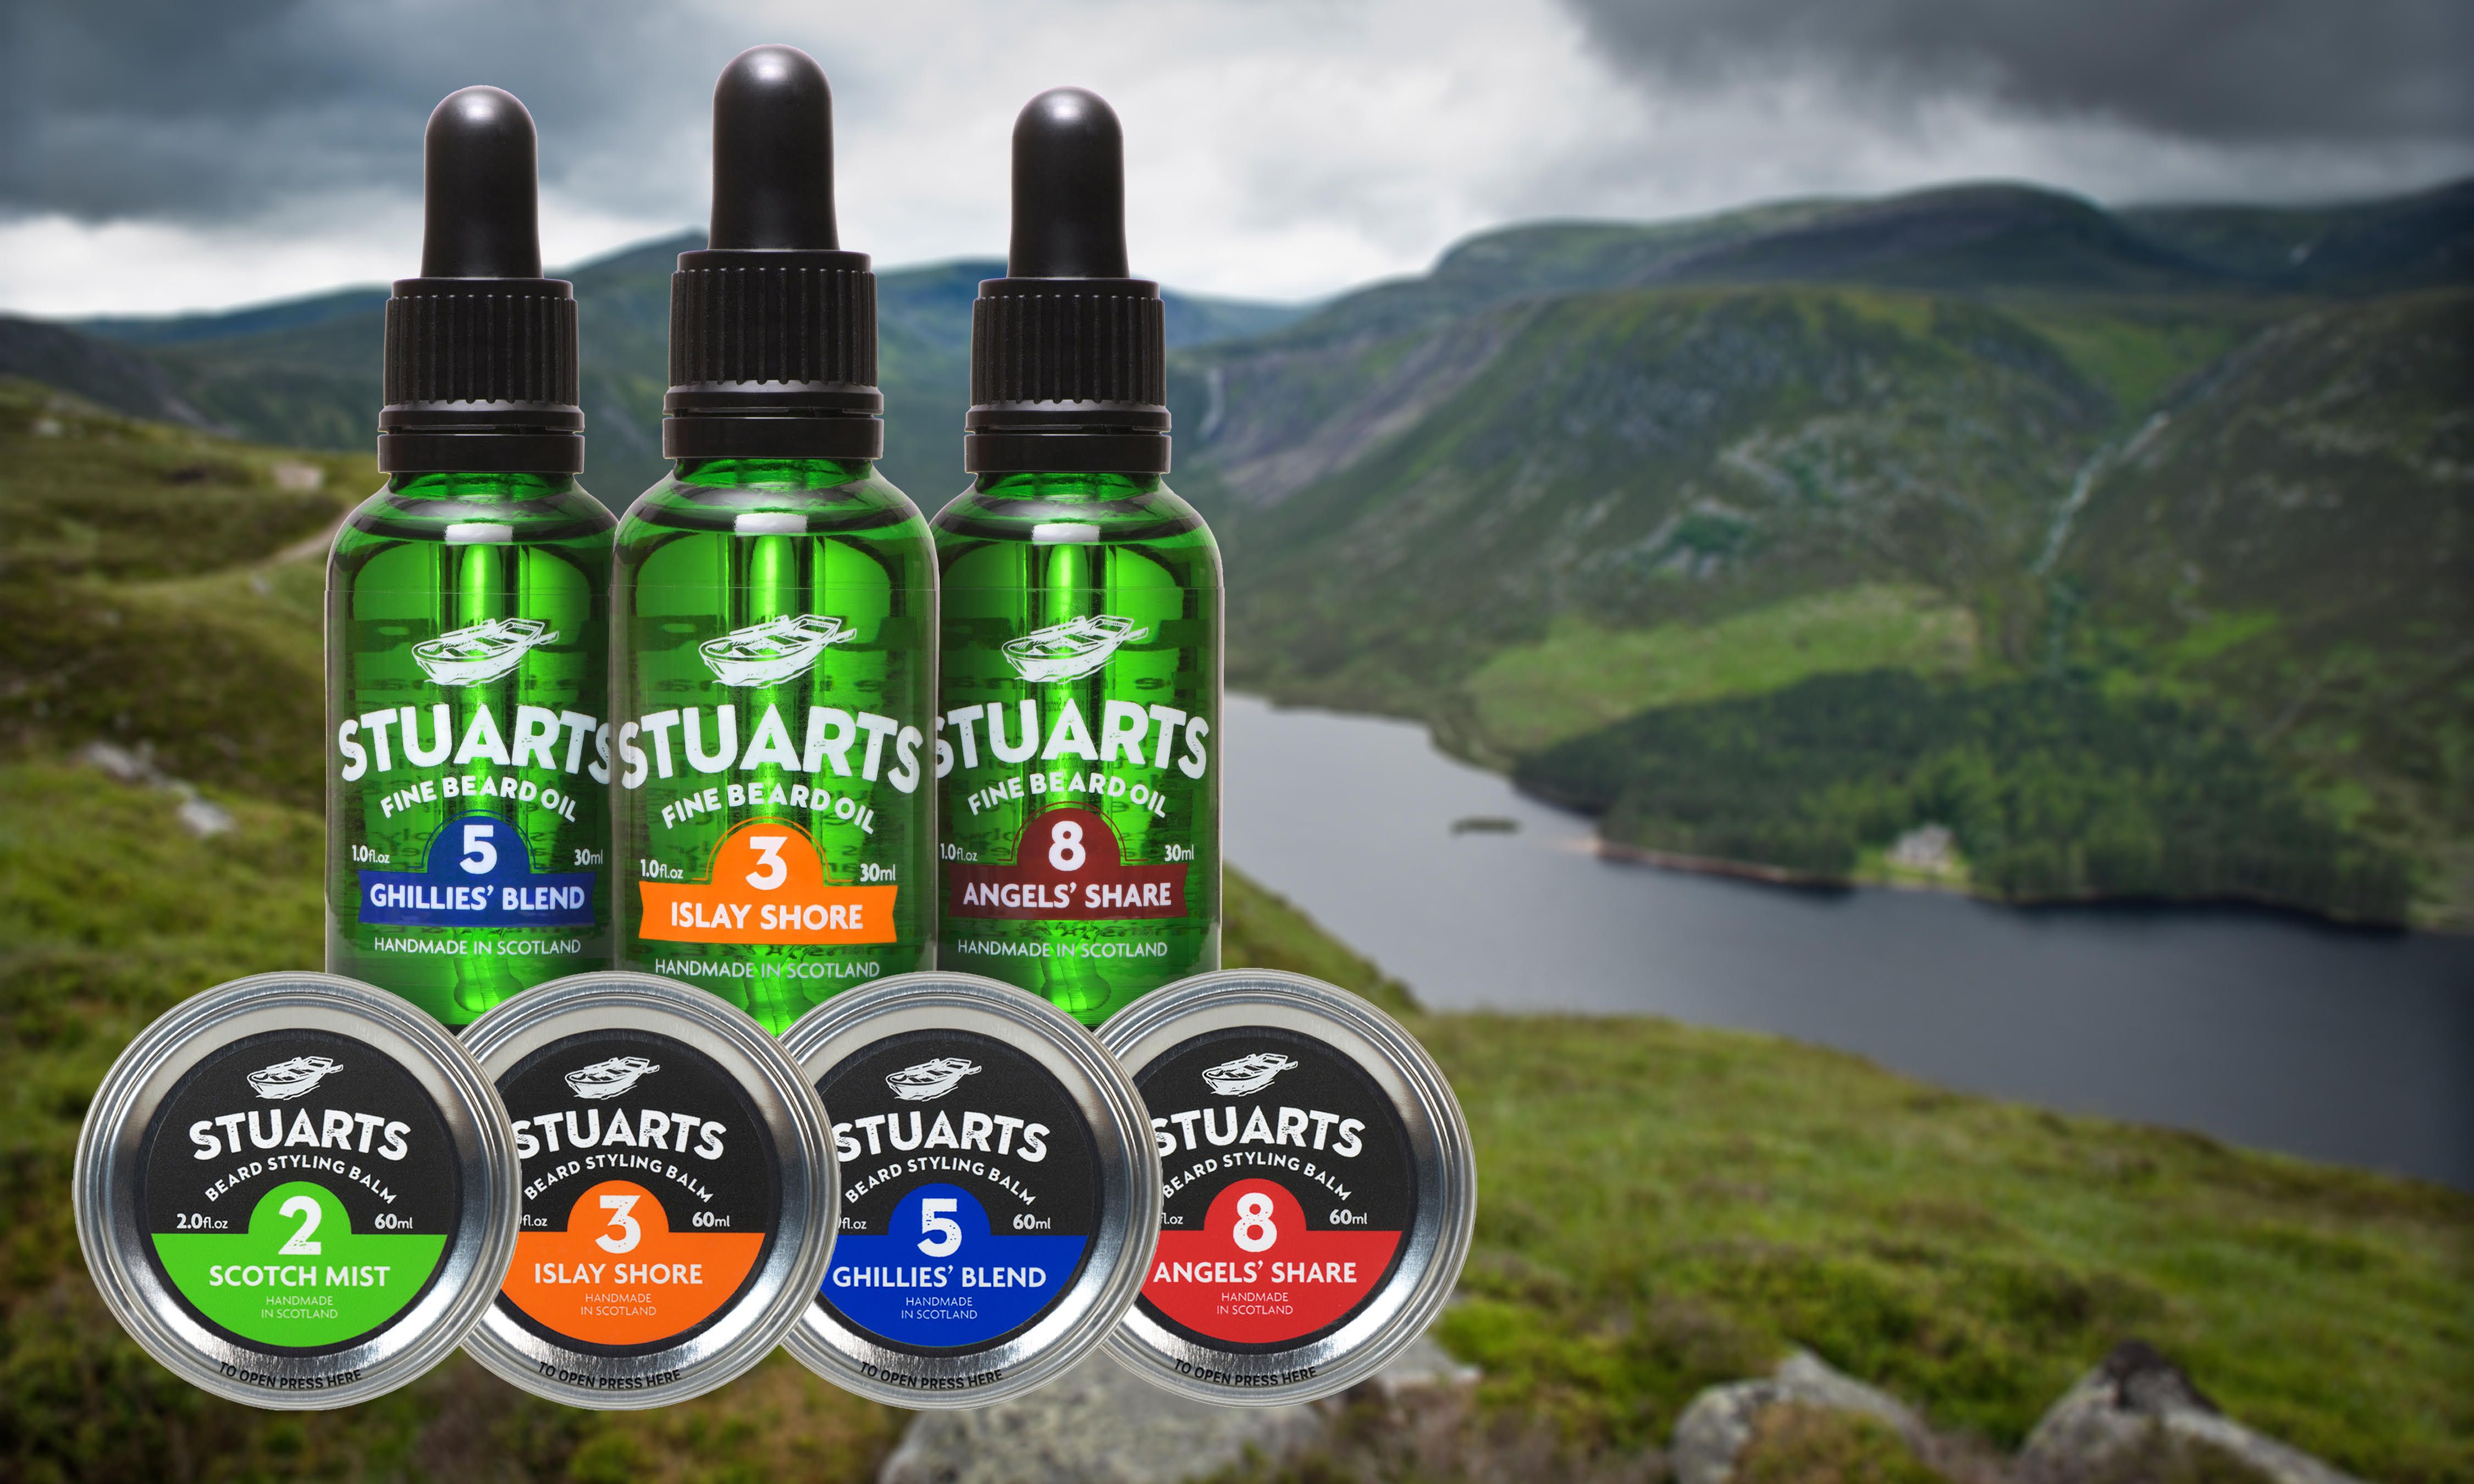 STUARTS Men's Grooming Products